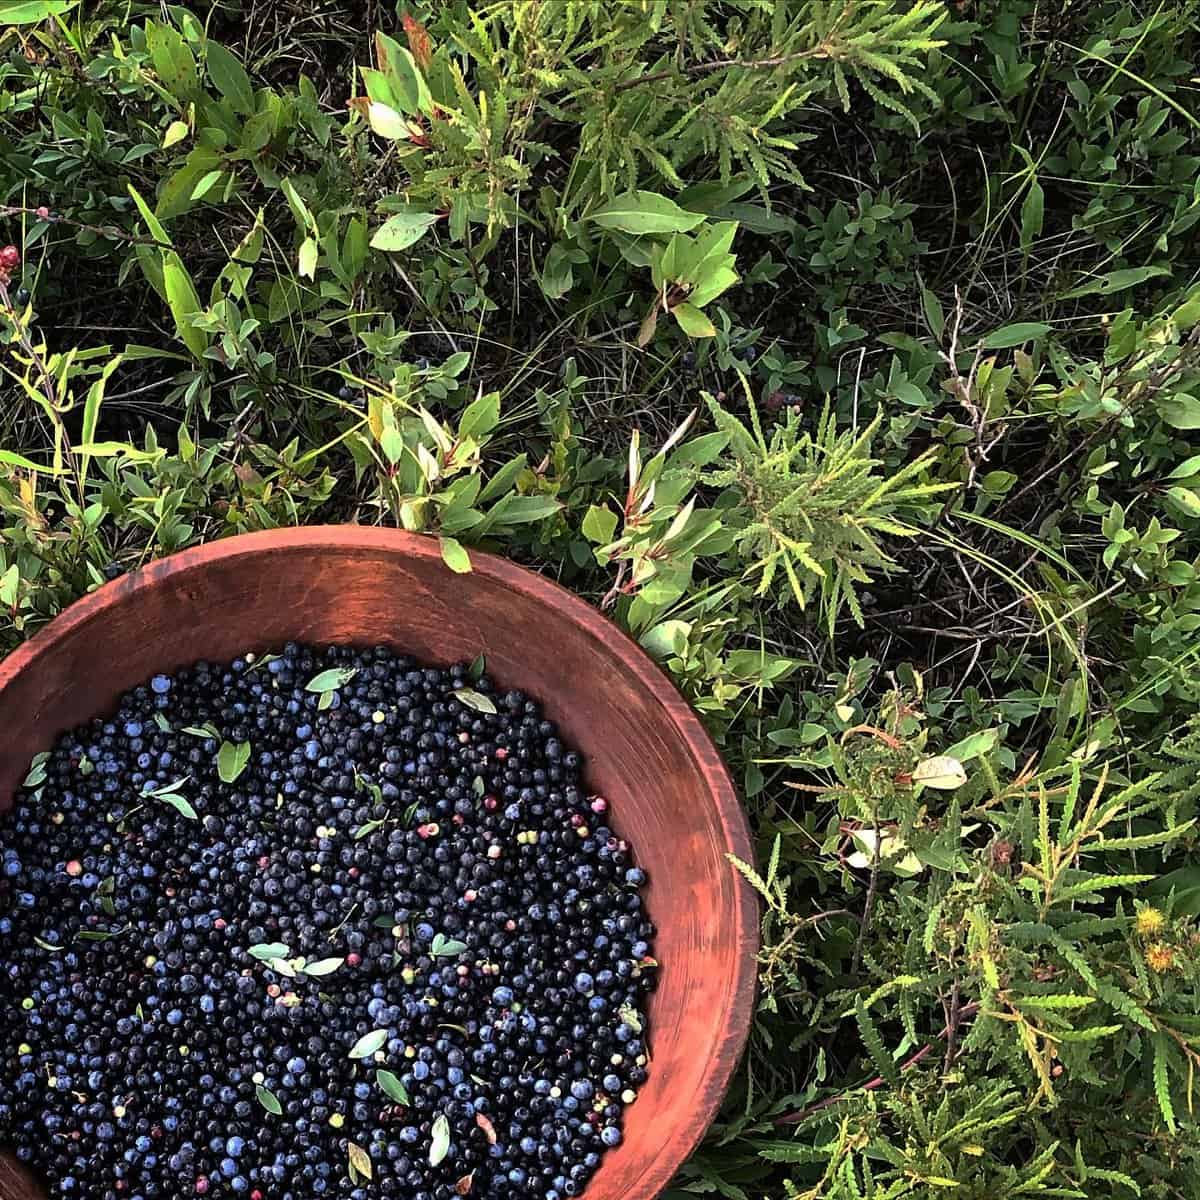 A very large bowl of wild blueberries